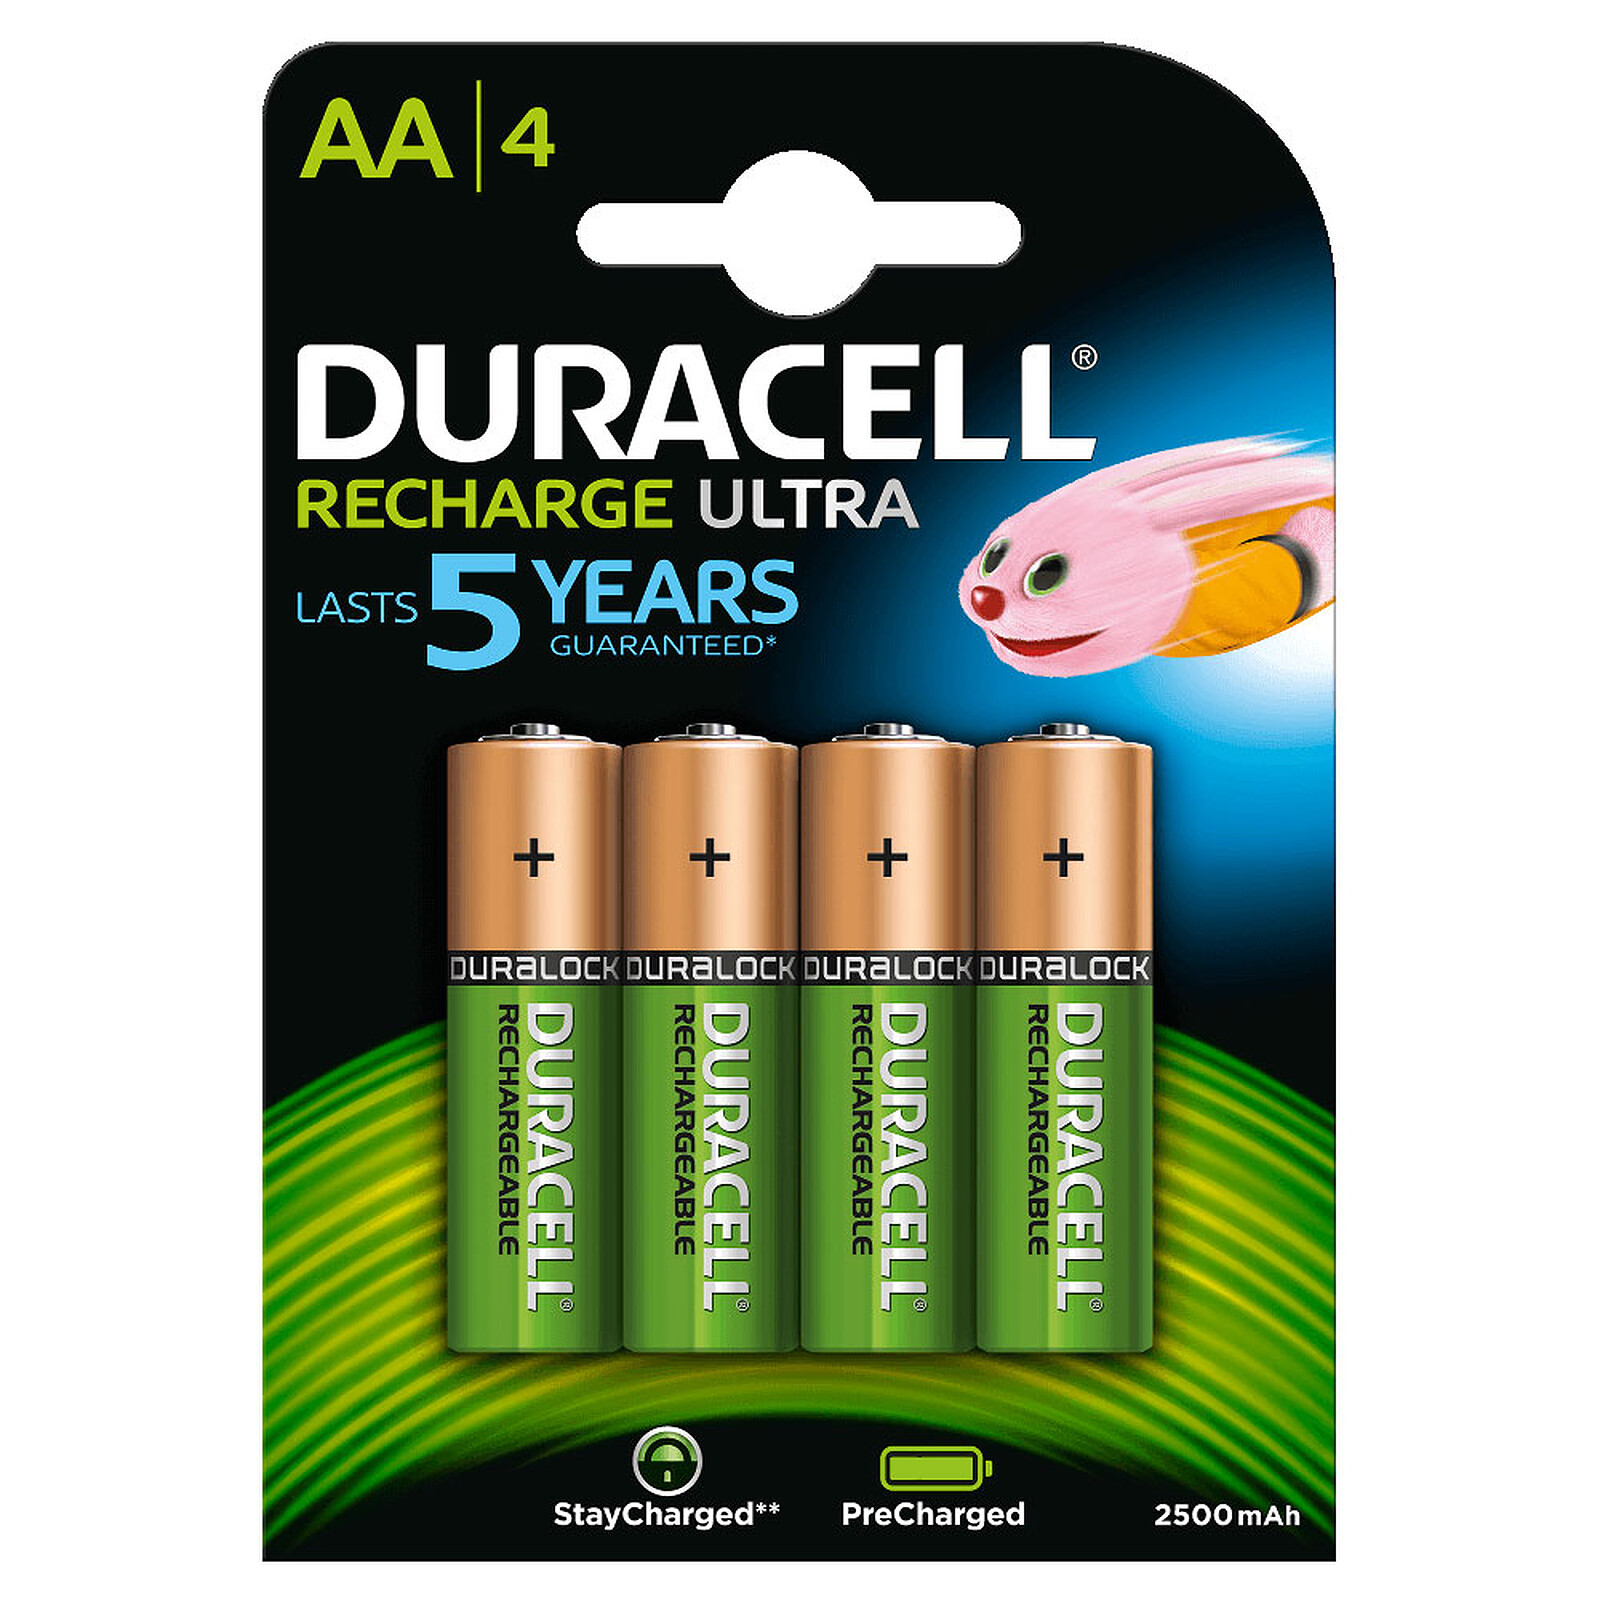 8 PILES RECHARGEABLES ENERGIZER RECHARGE EXTREME POWER HR06 AA